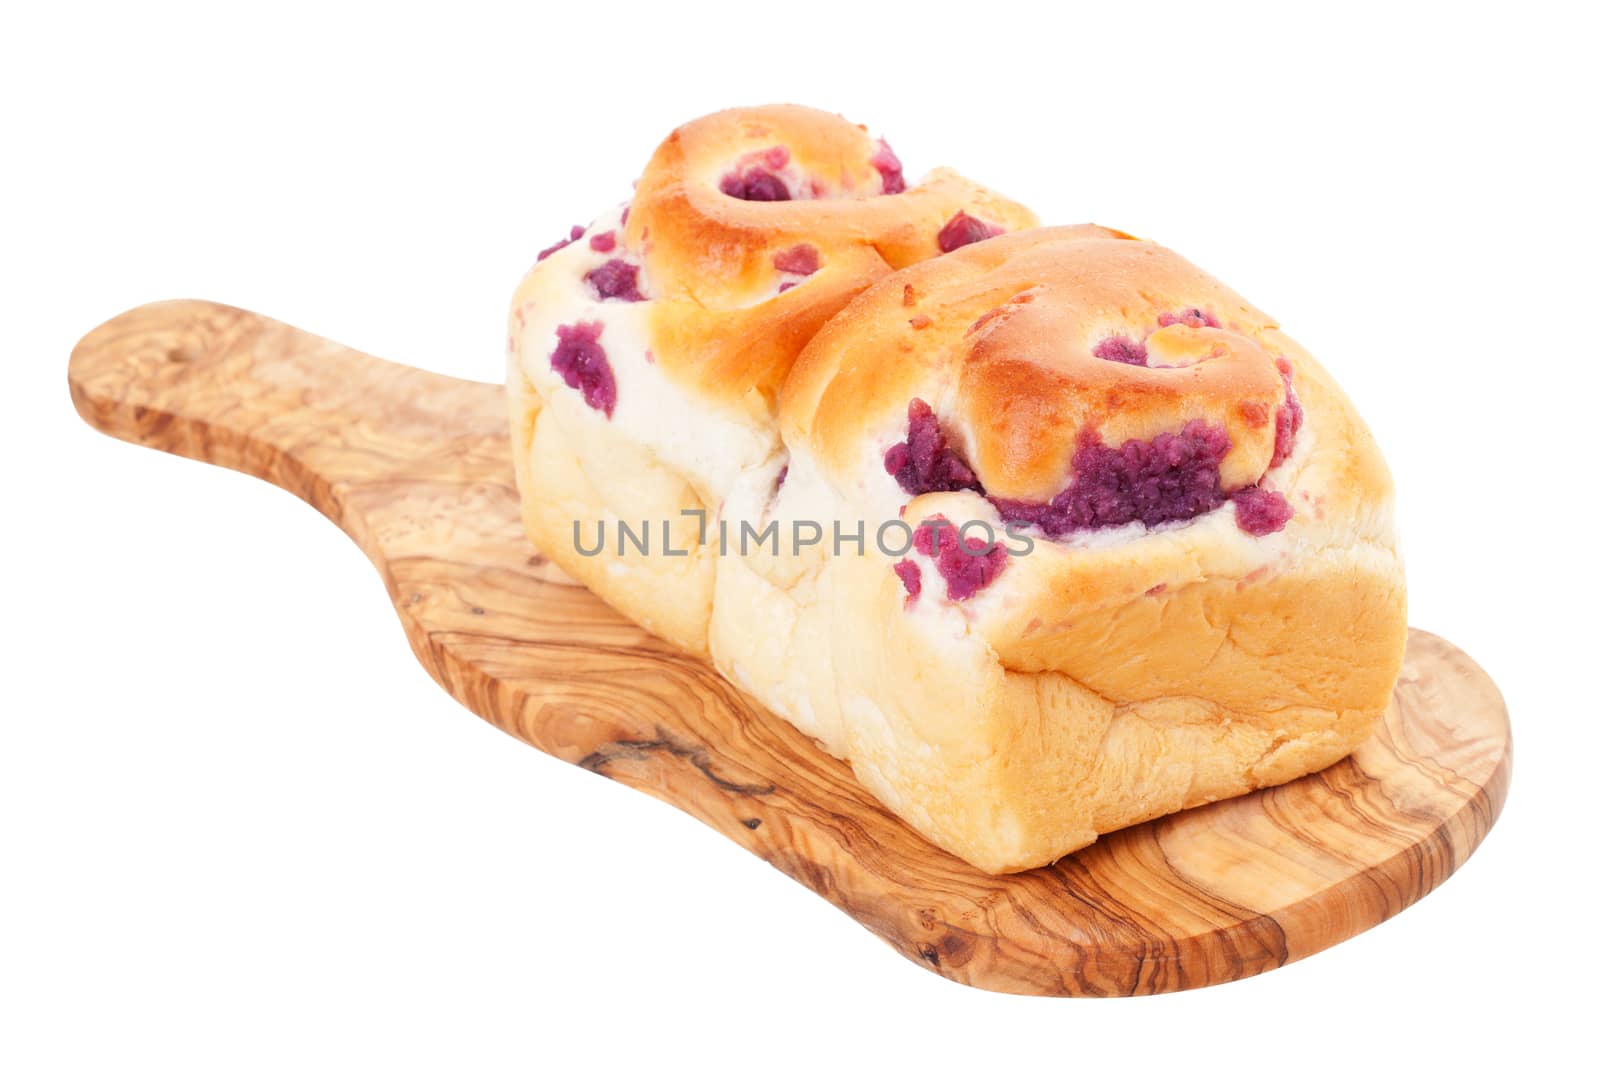 Ube loaf purple yam bread cooling on a wooden board.  An Asian bread.  Shot on white background.